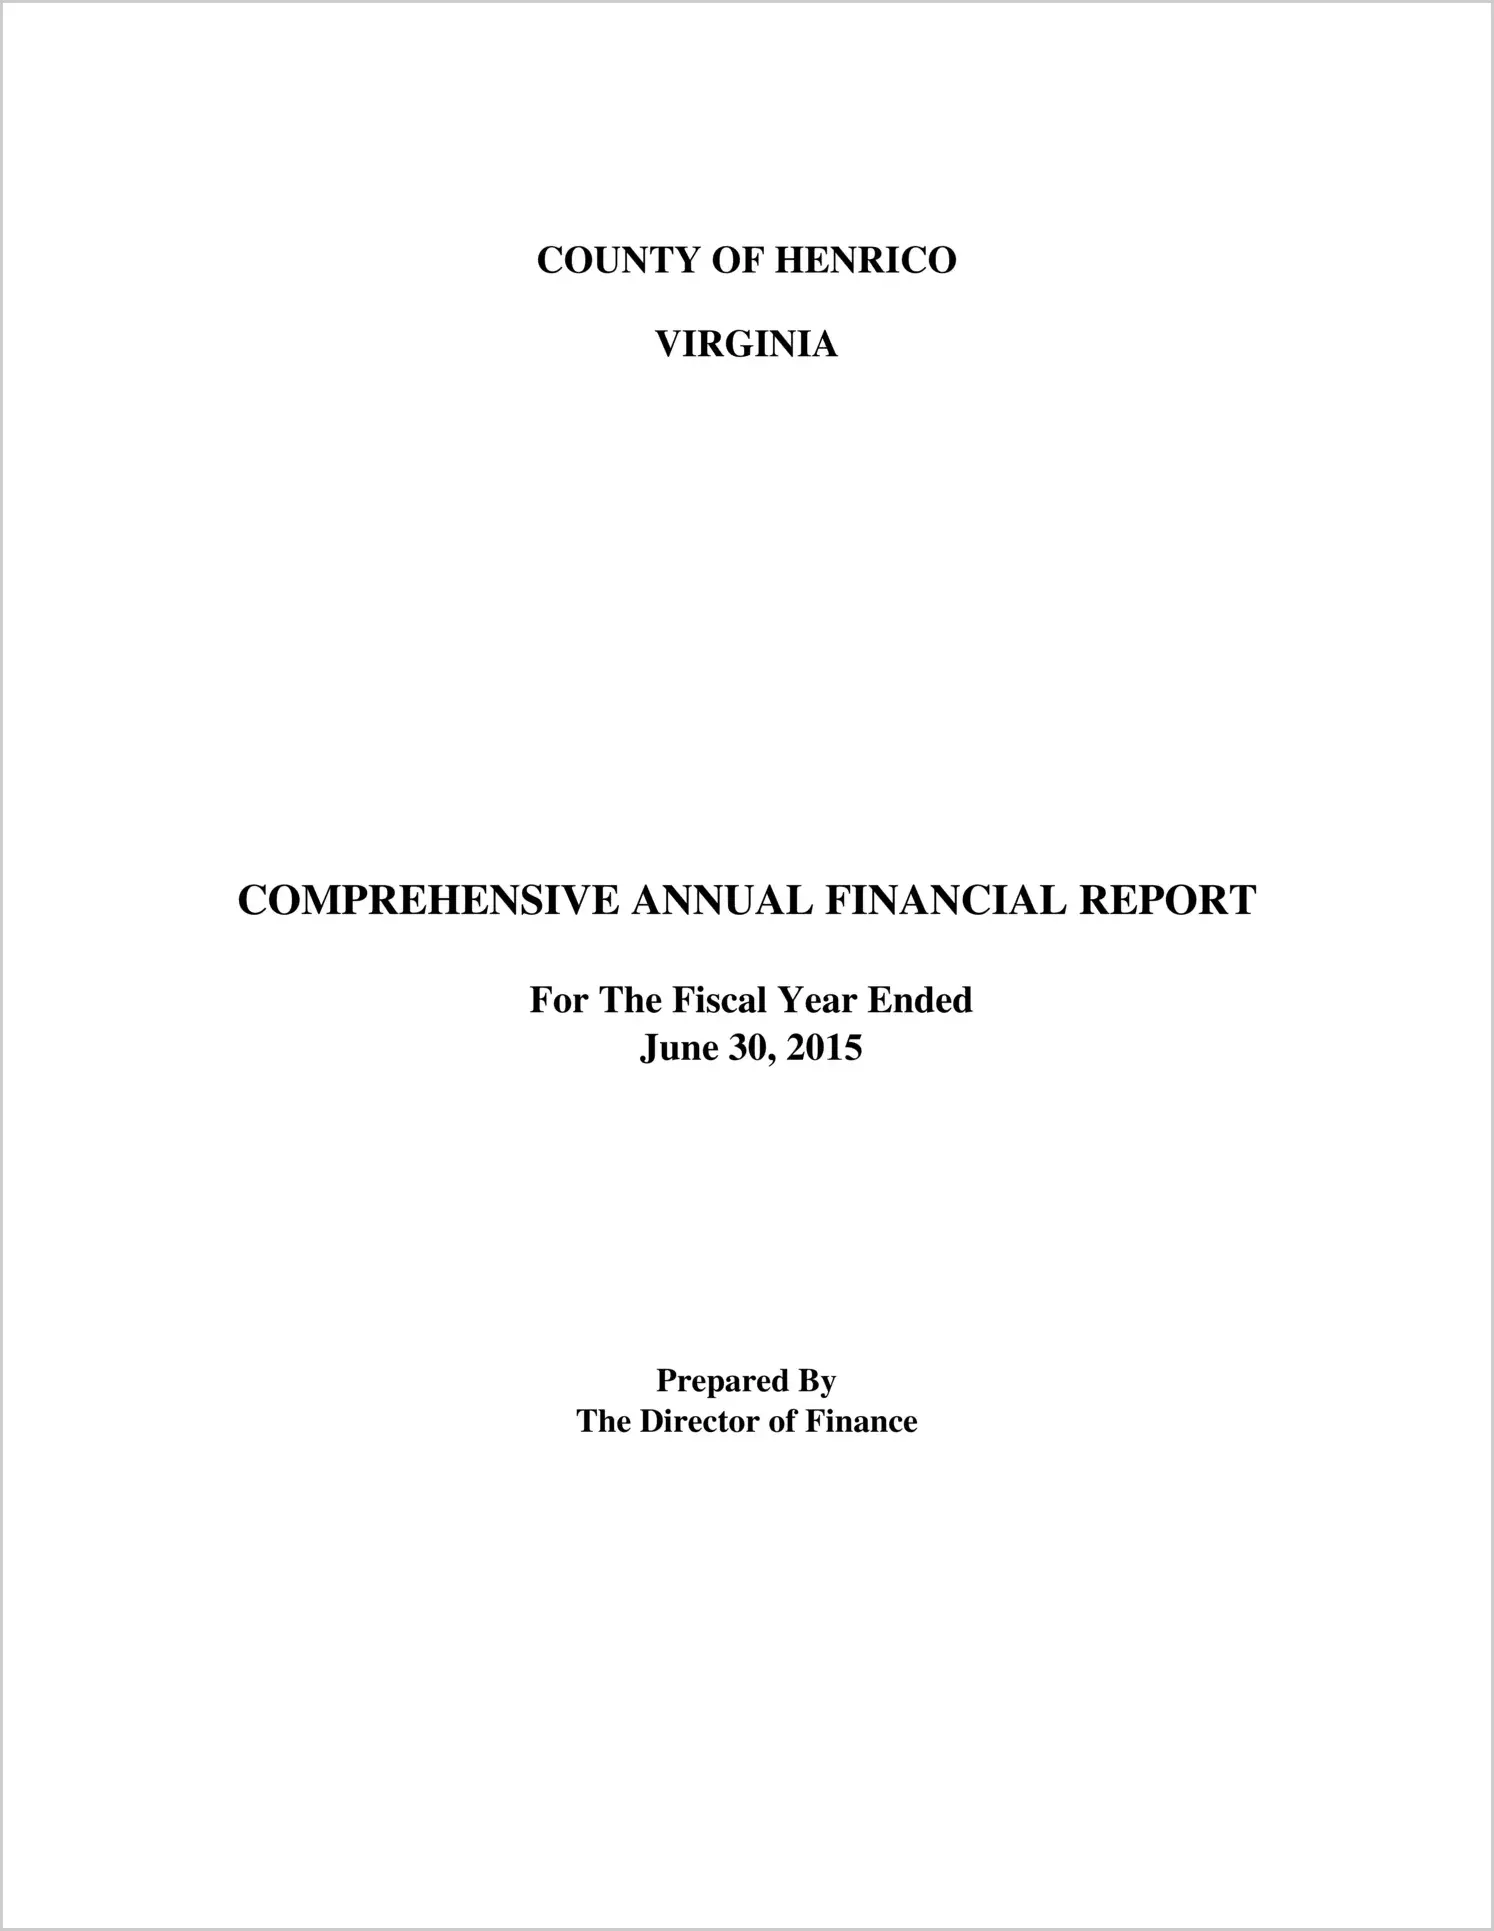 2015 Annual Financial Report for County of Henrico